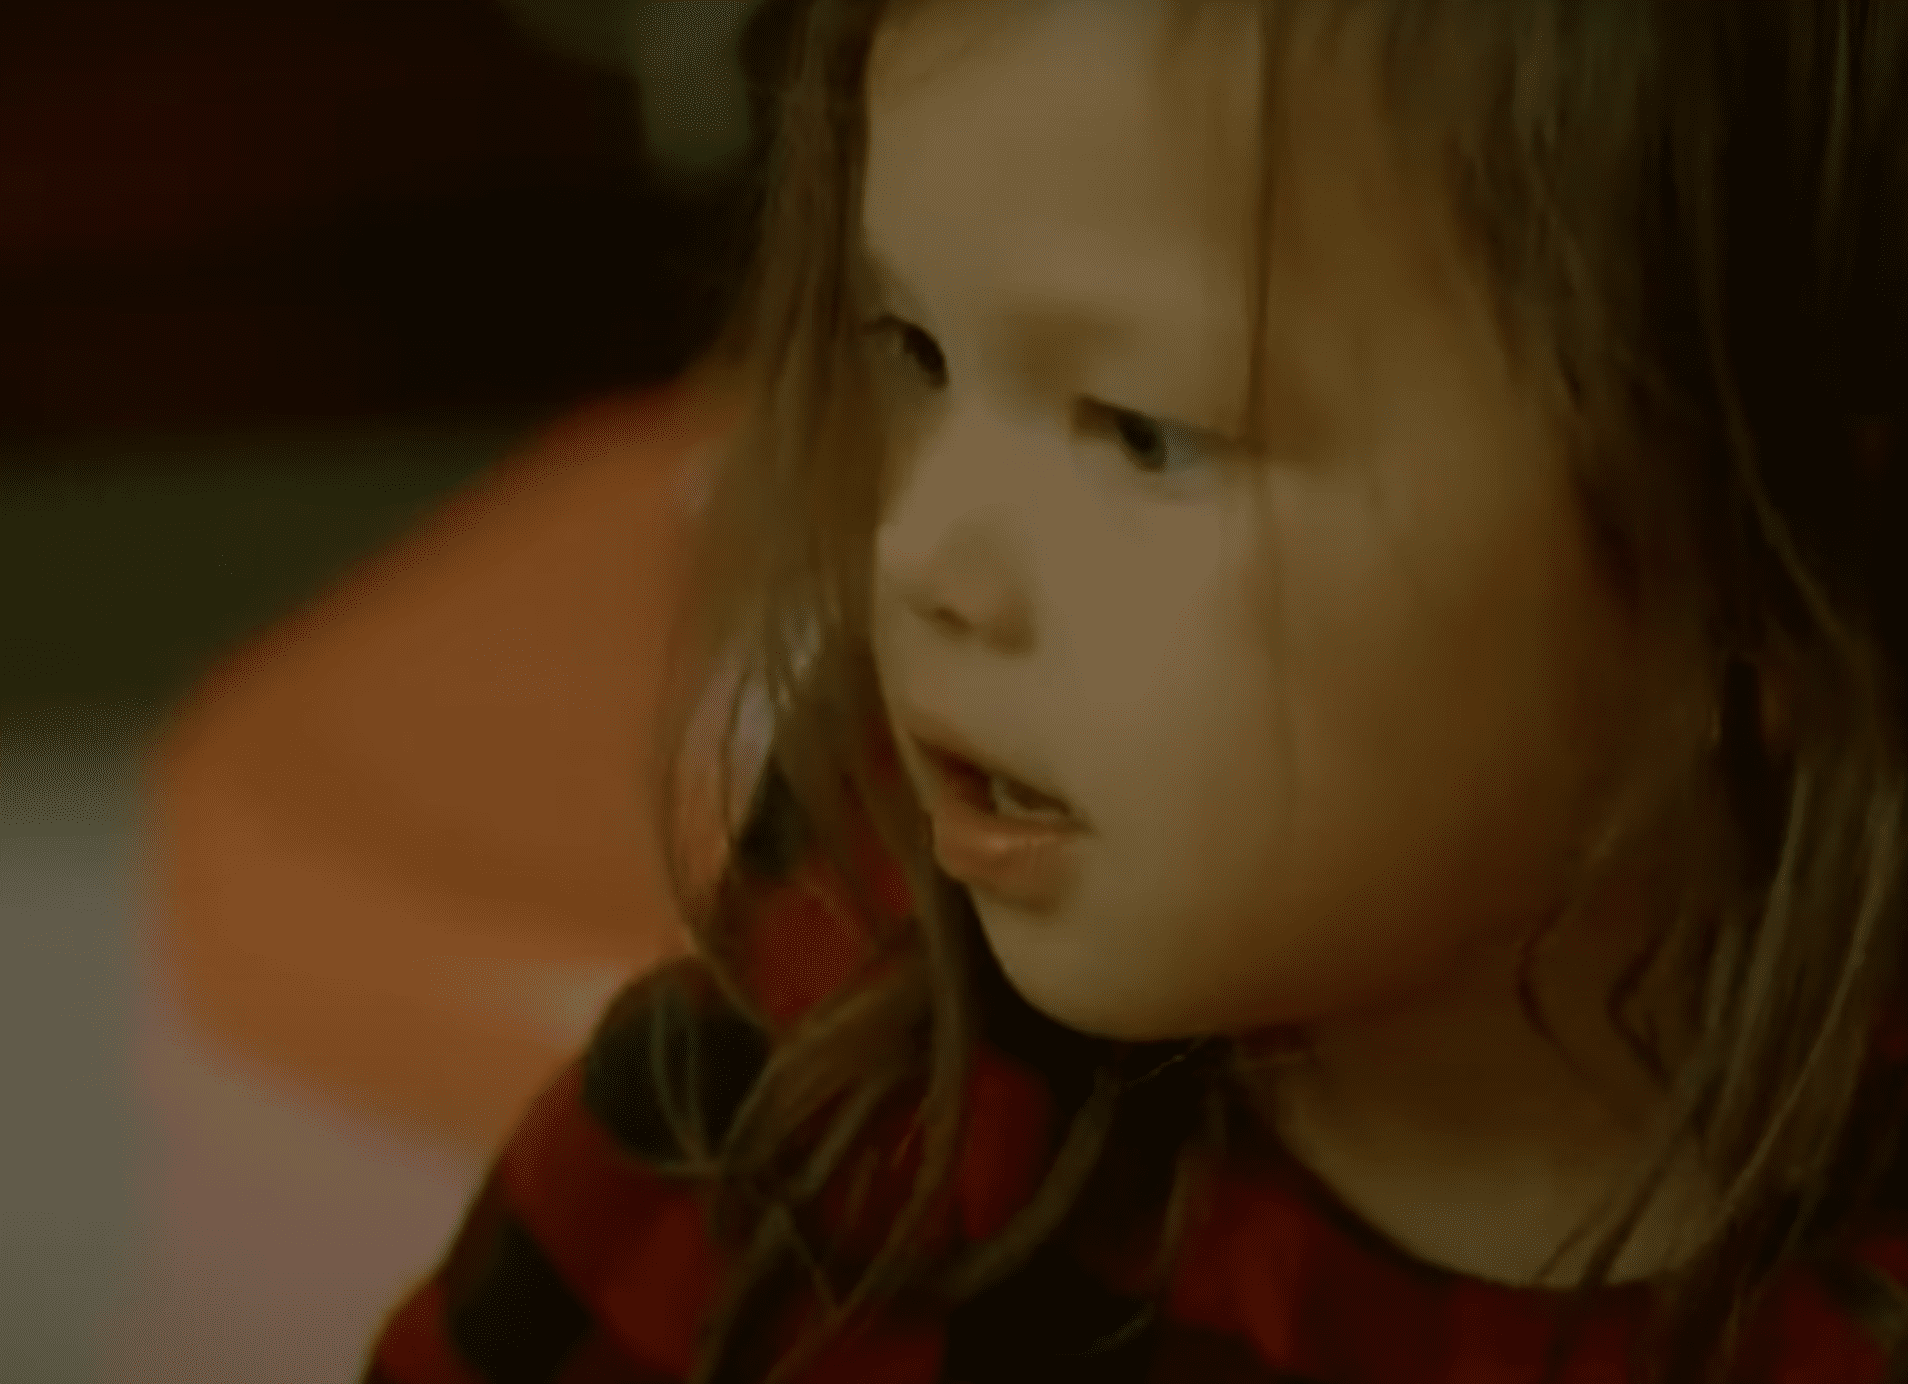 Three-year-old Jayden who heard a voice in her room. | Source: youtube.com/KING 5